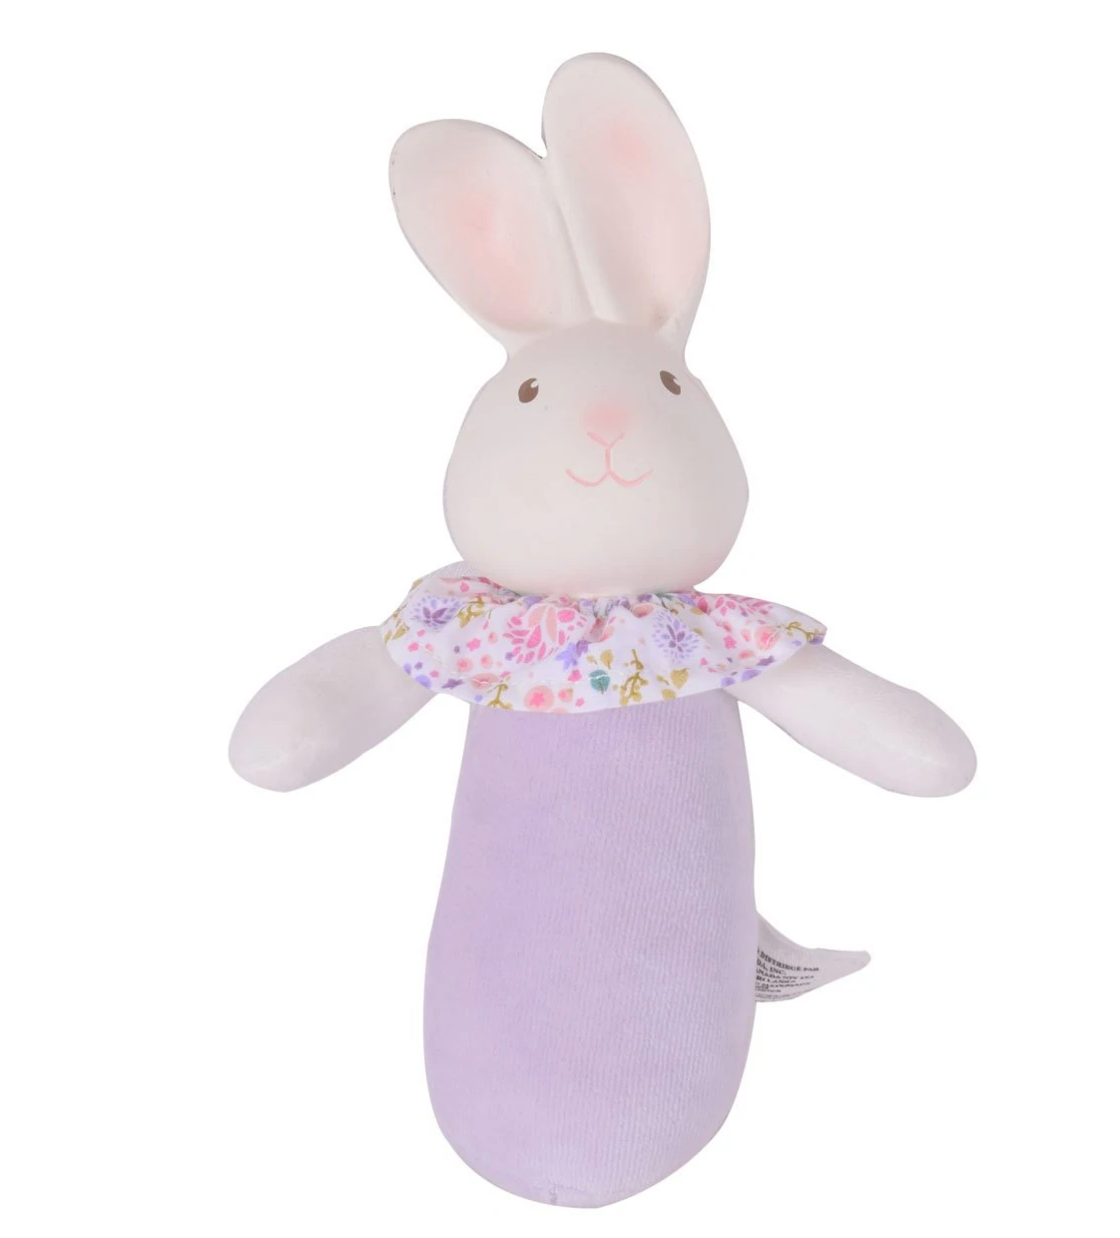 Havah the Bunny Soft Squeaker Toy